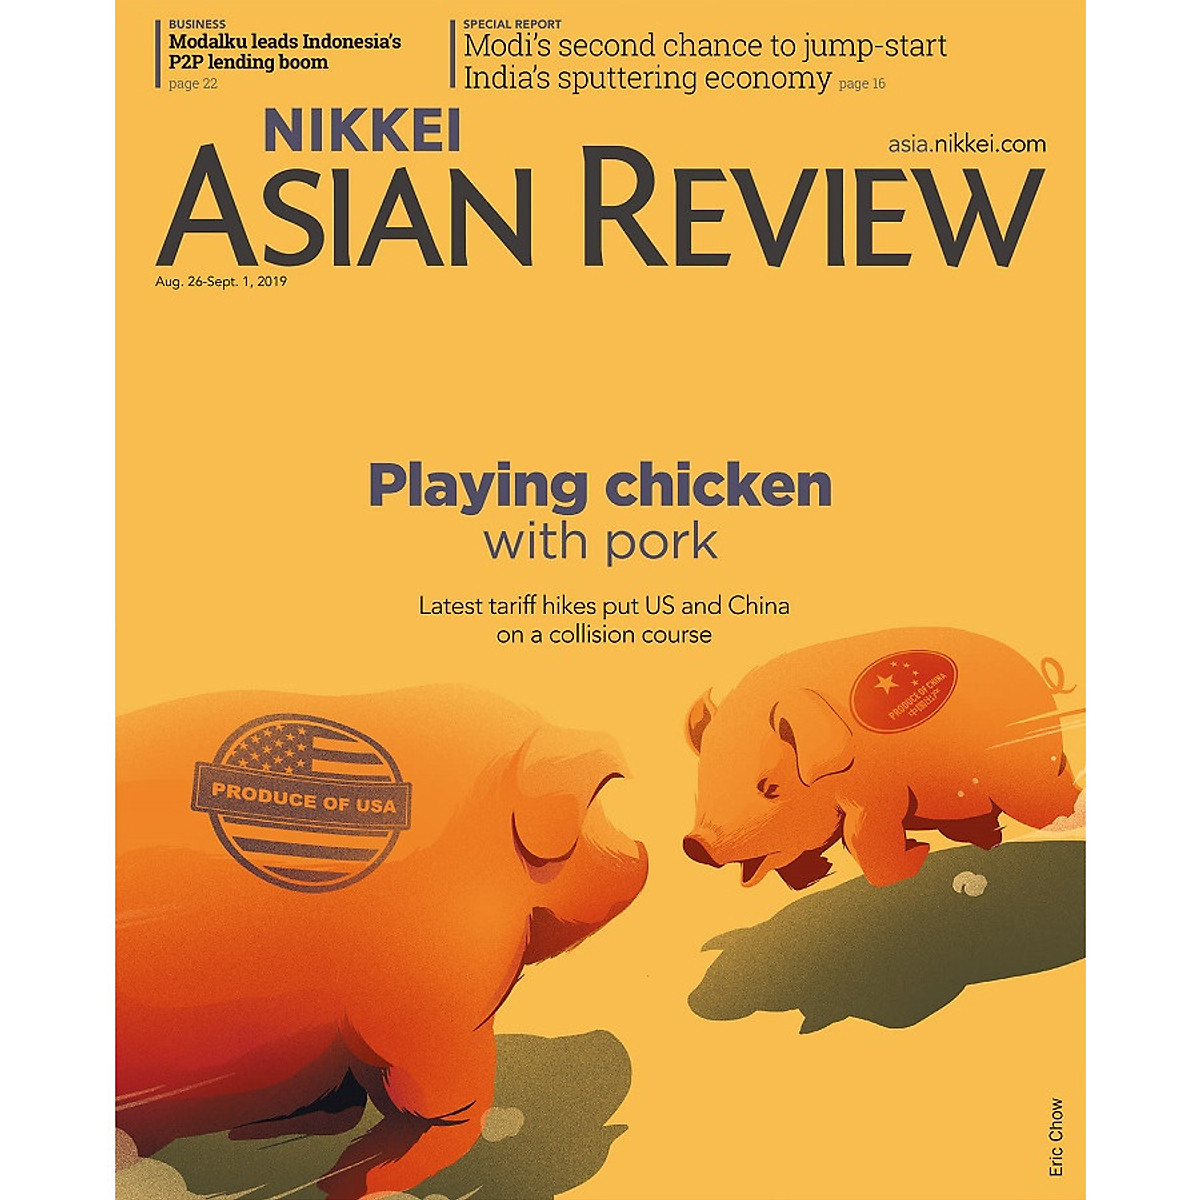 Nikkei Asian Review: Playing Chicken With Pork - 33.19